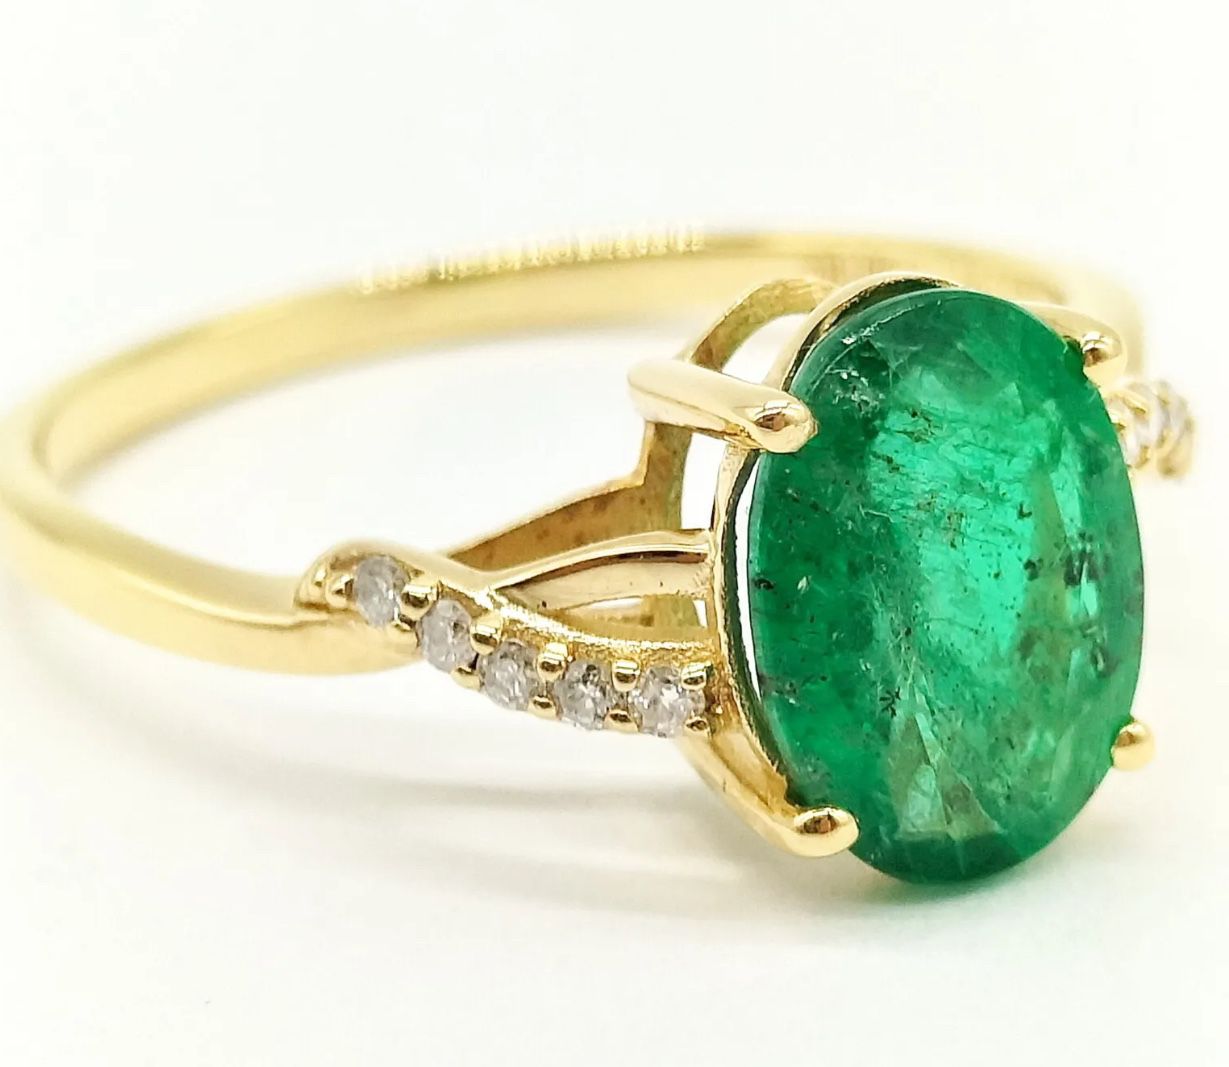 Stunning Natural 1.62 CT Emerald and 0.06ct Diamonds on 18K Ring Size 6.75